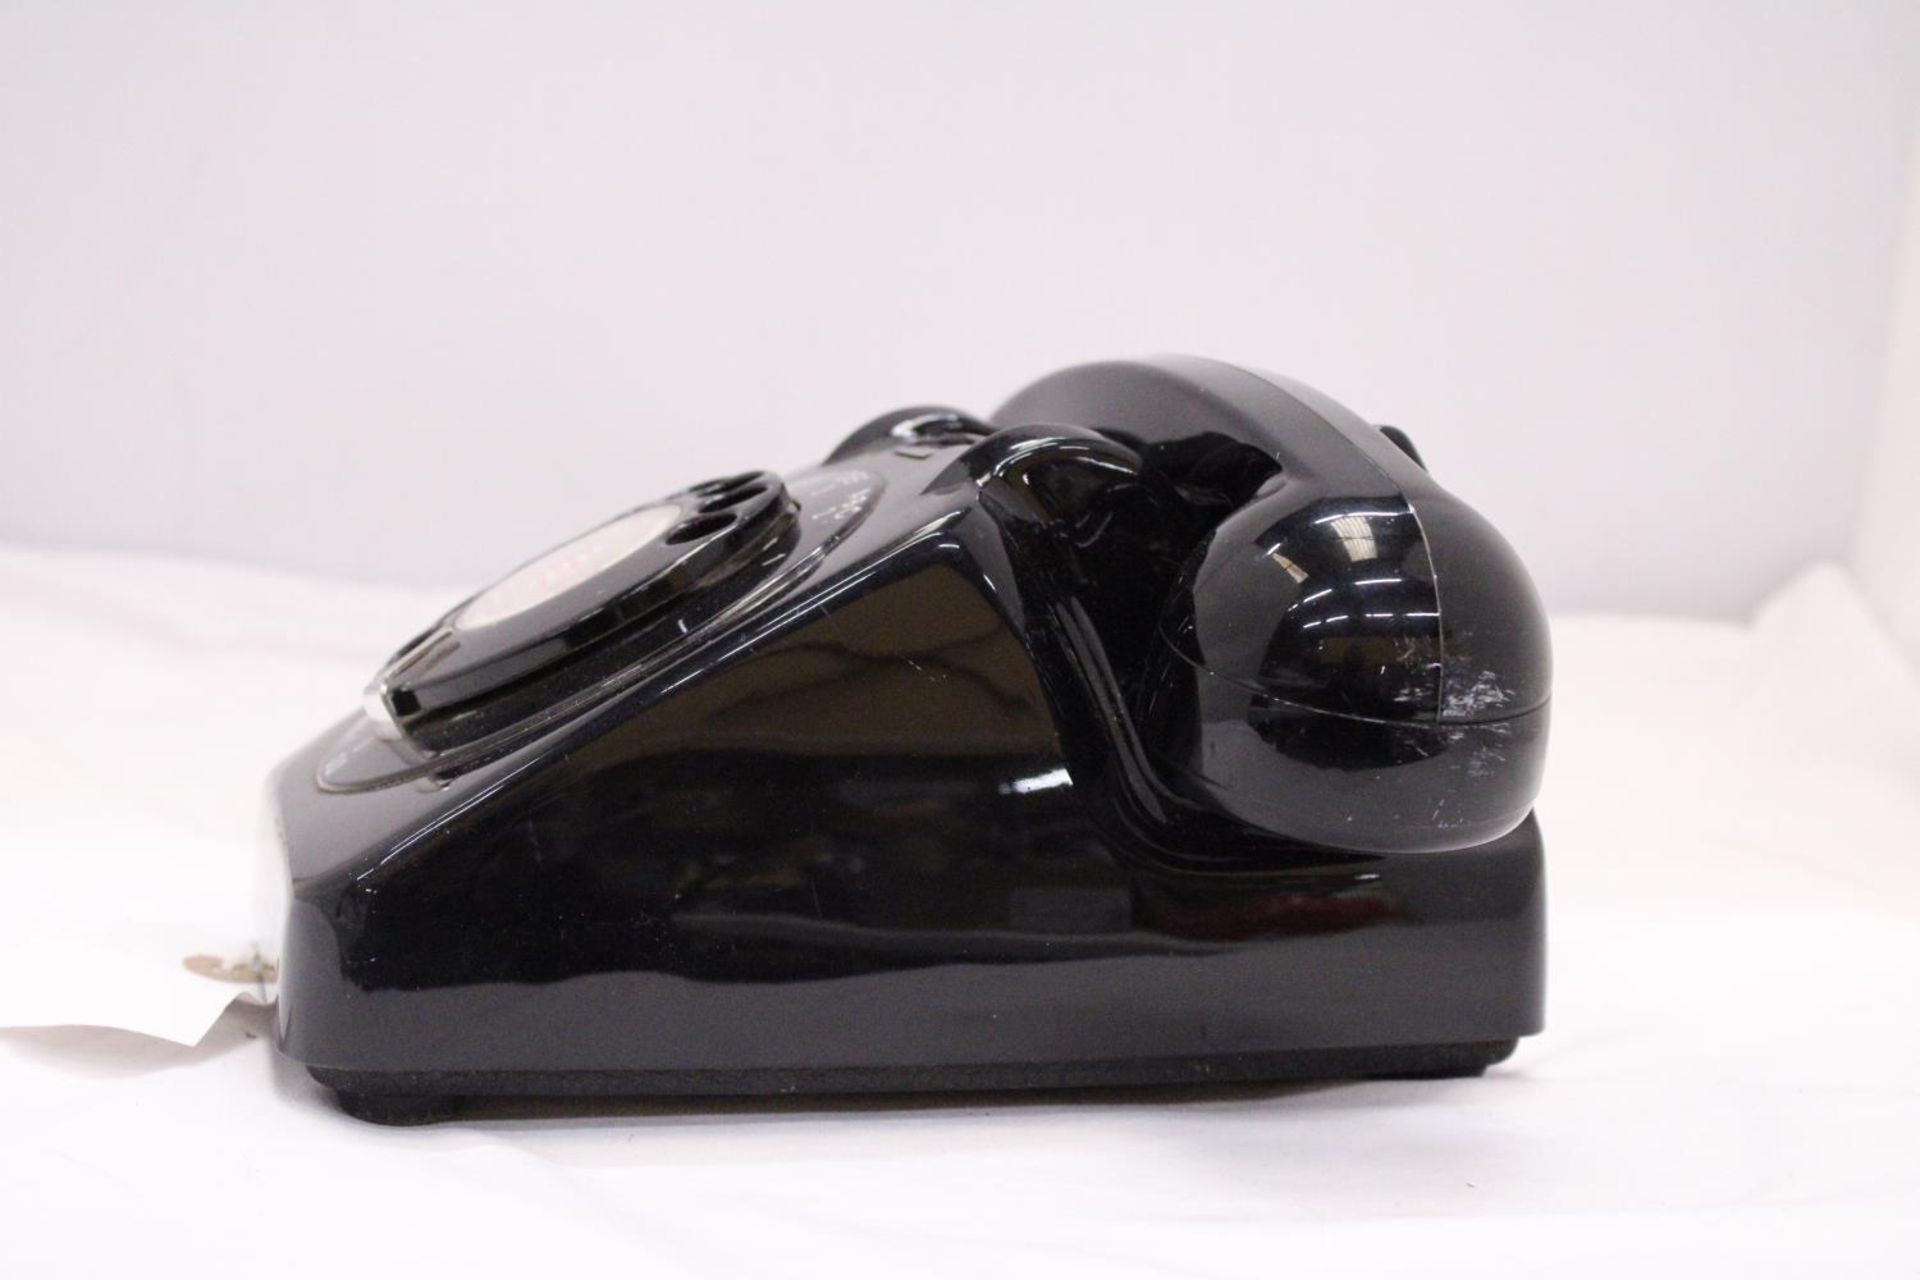 A VINTAGE BLACK TELEPHONE WITH DIAL - Image 4 of 6